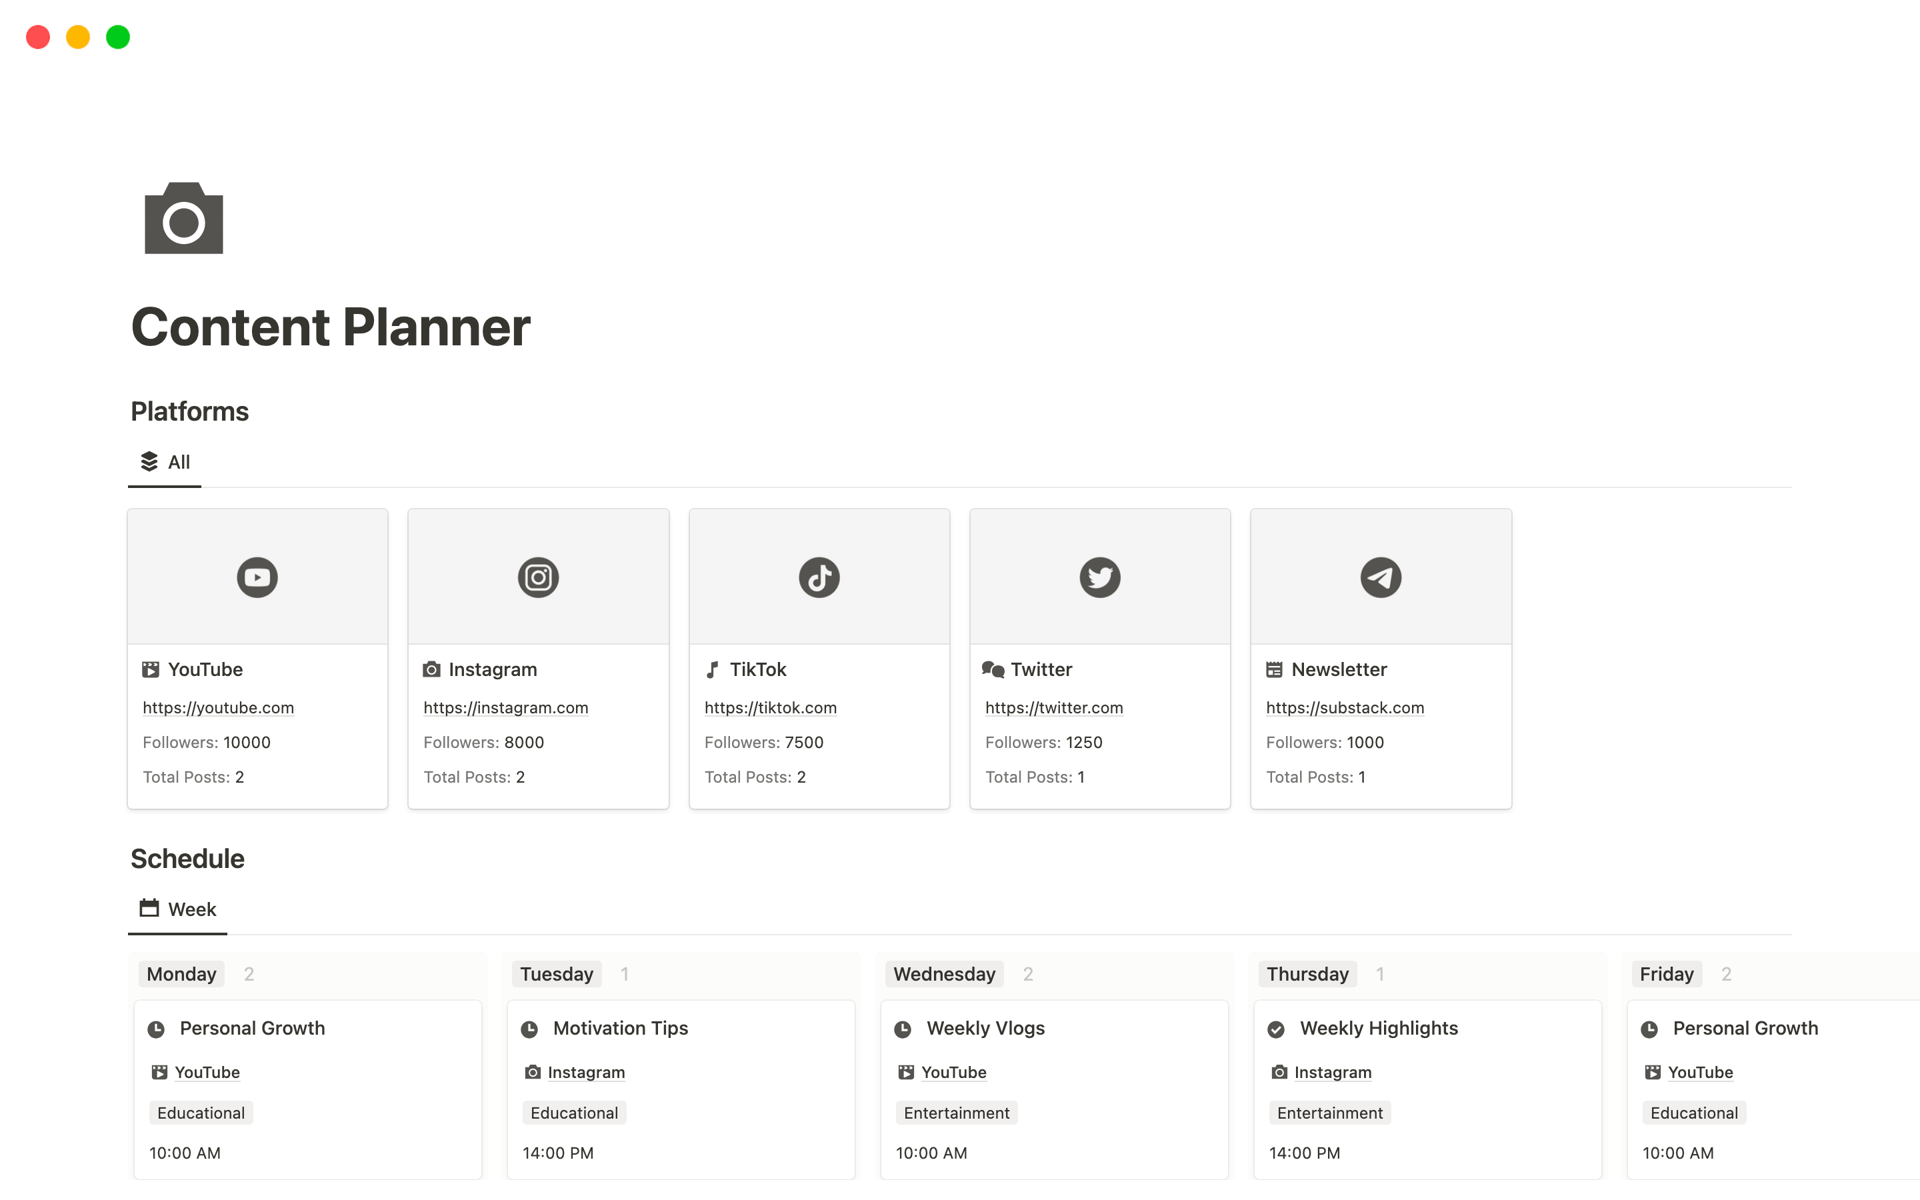 Notion Content Planner enables creators to streamline content creation across social media with comprehensive planning, tracking, and scheduling tools.